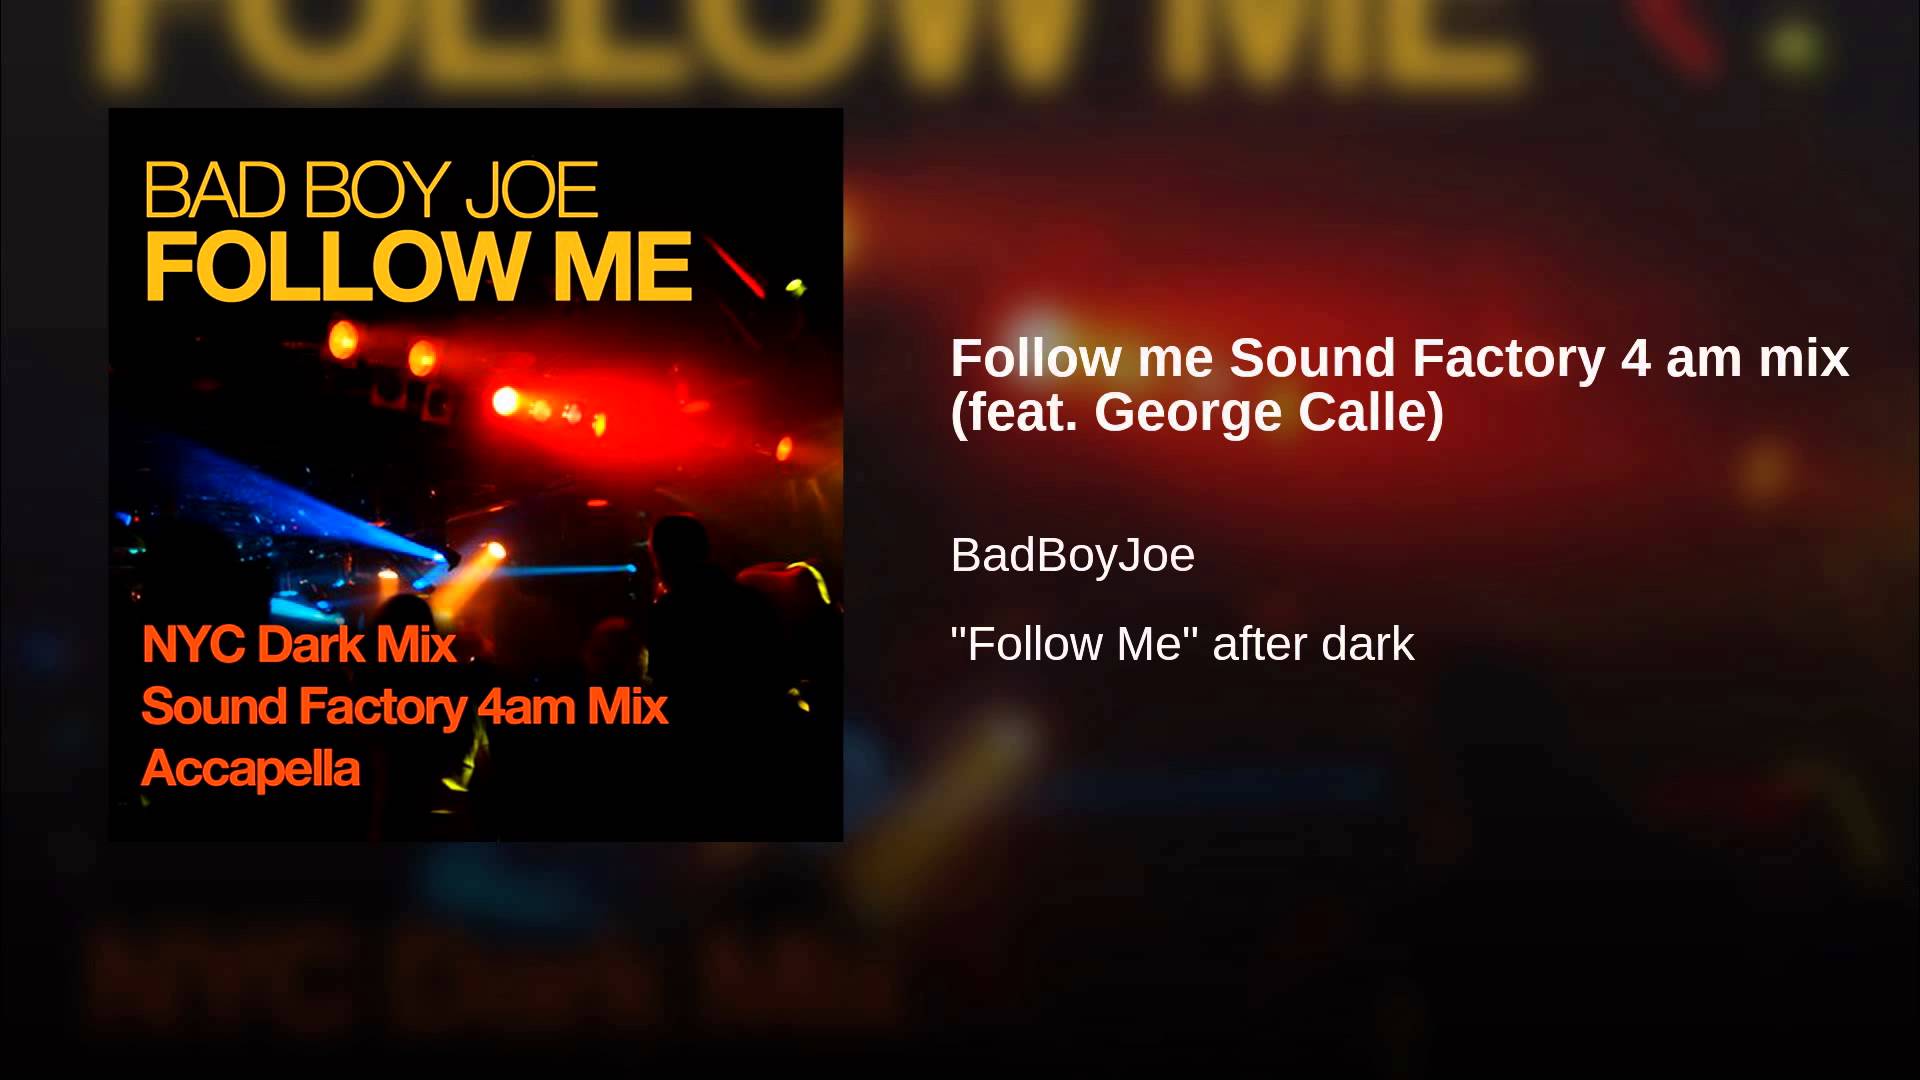 Follow me Sound Factory 4 am mix (feat. George Calle) - YouTube